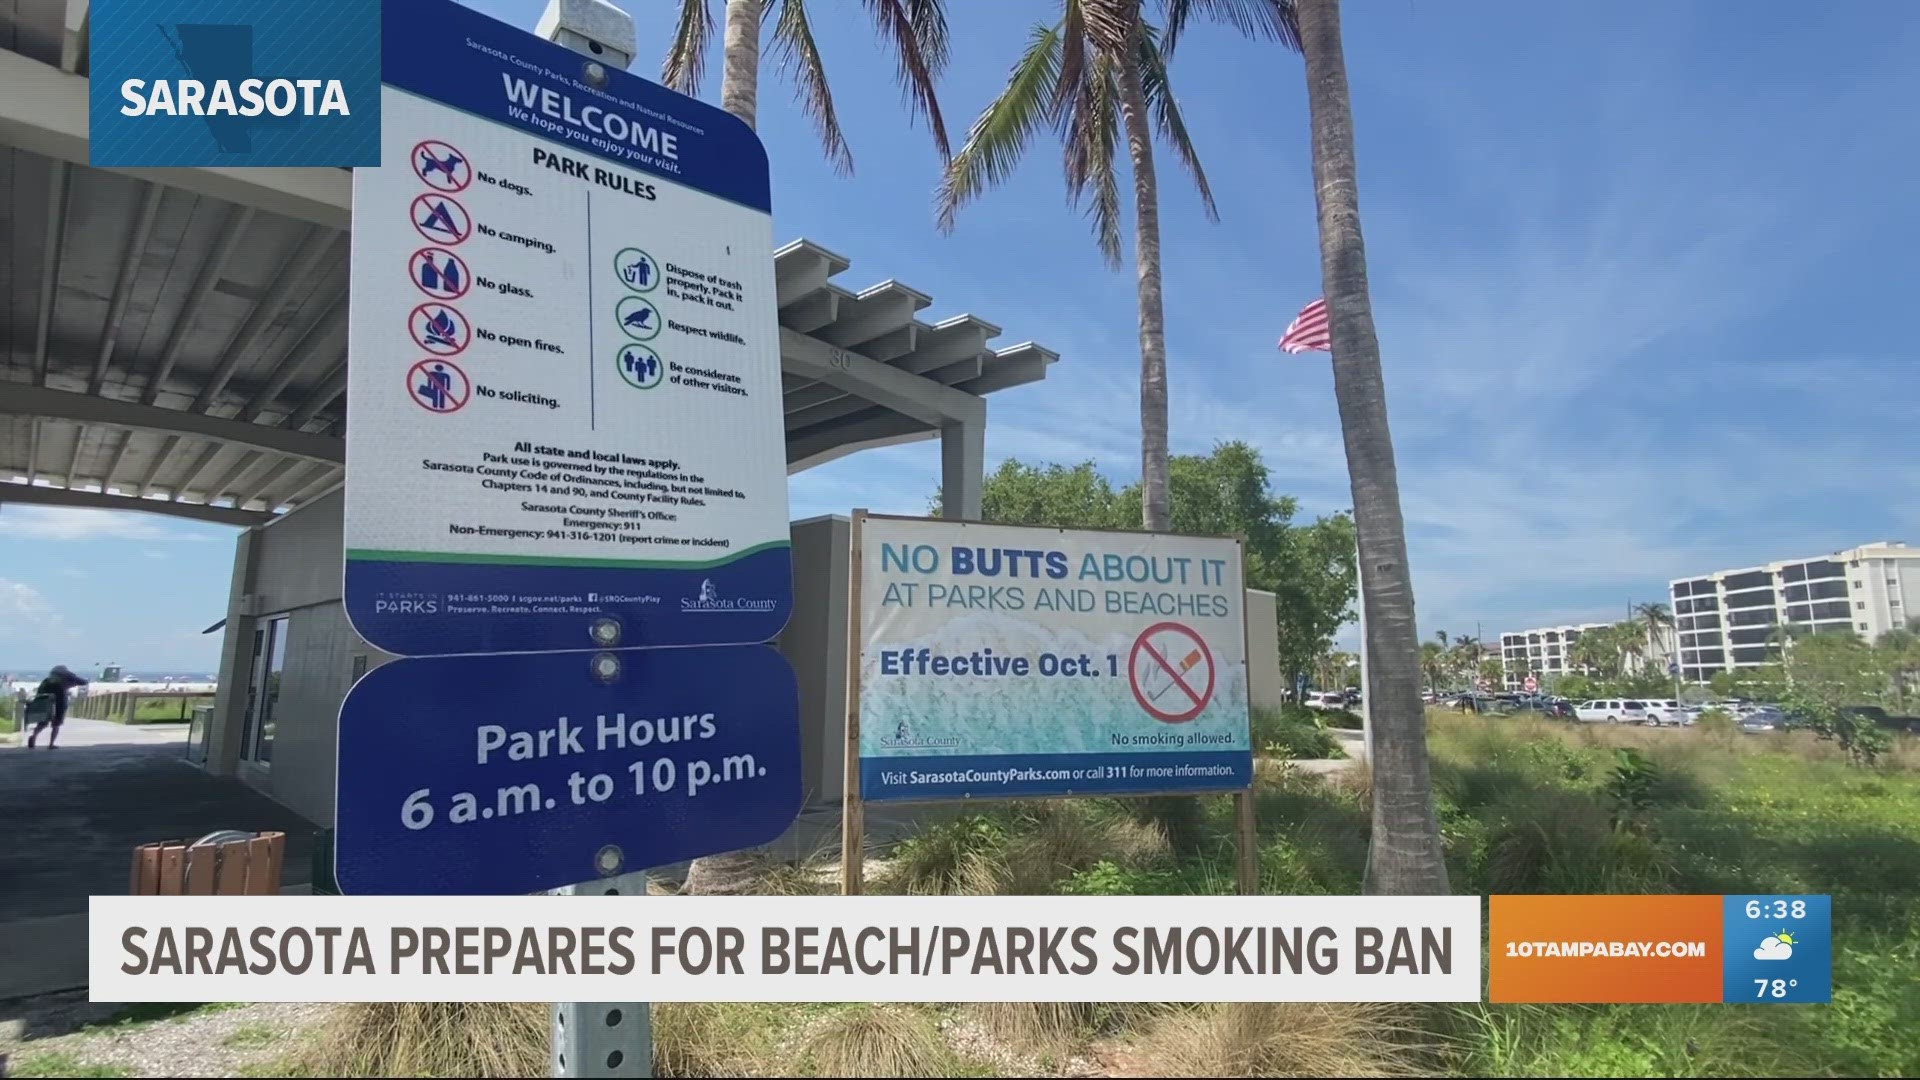 A fine imposed for smoking at public parks is meant to prevent accidental wildfires and reduce littering.